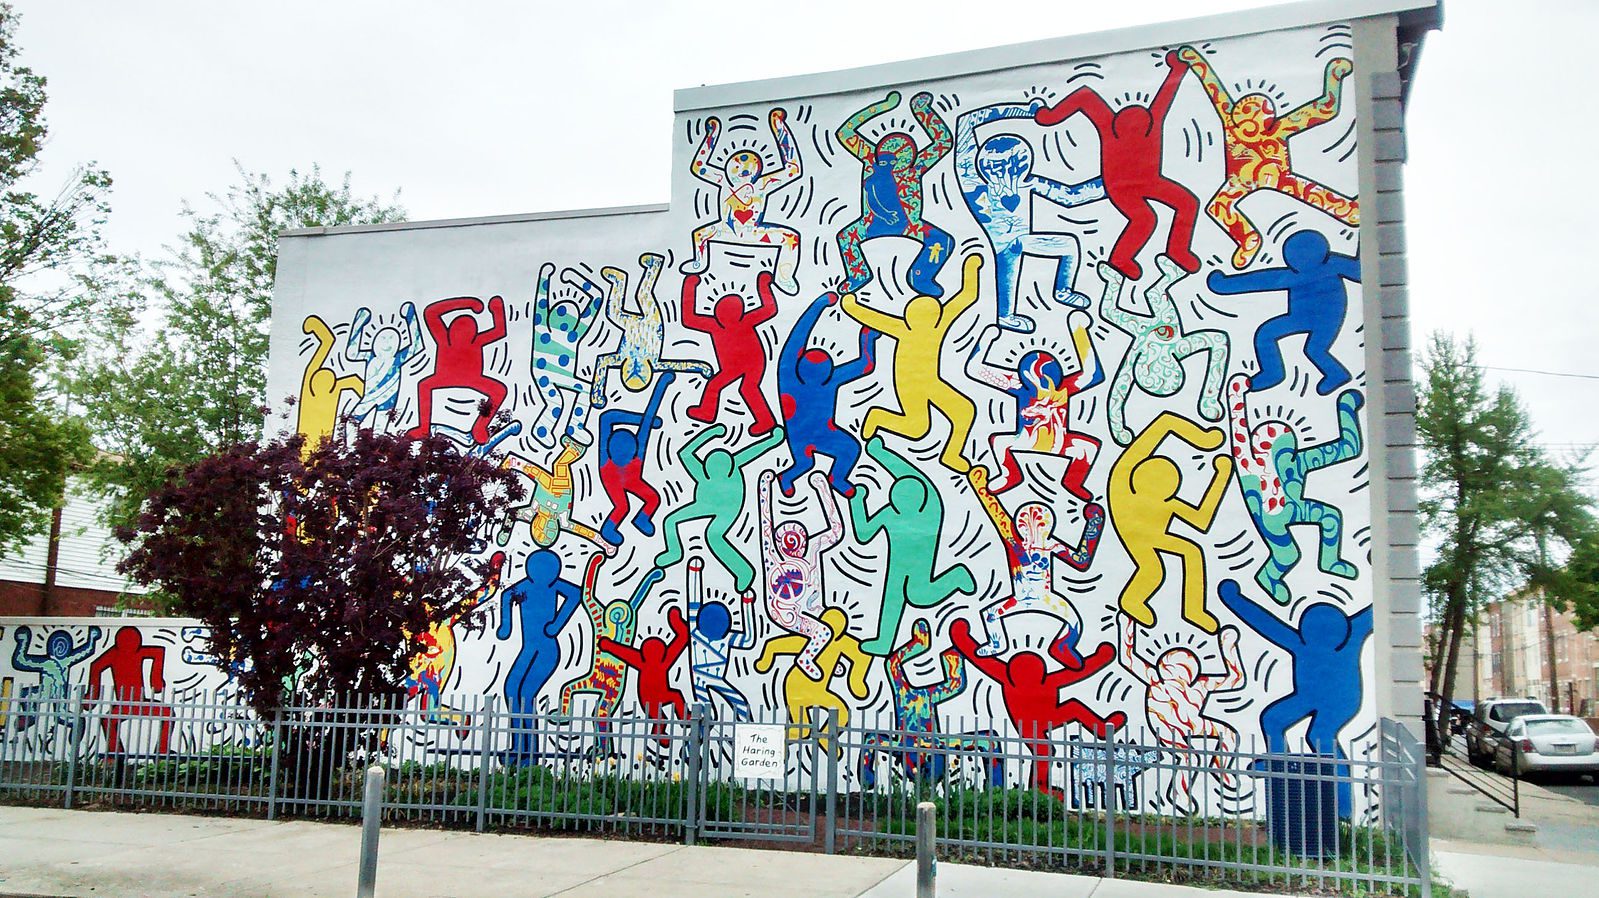 Keith Haring mural on outdoor wall